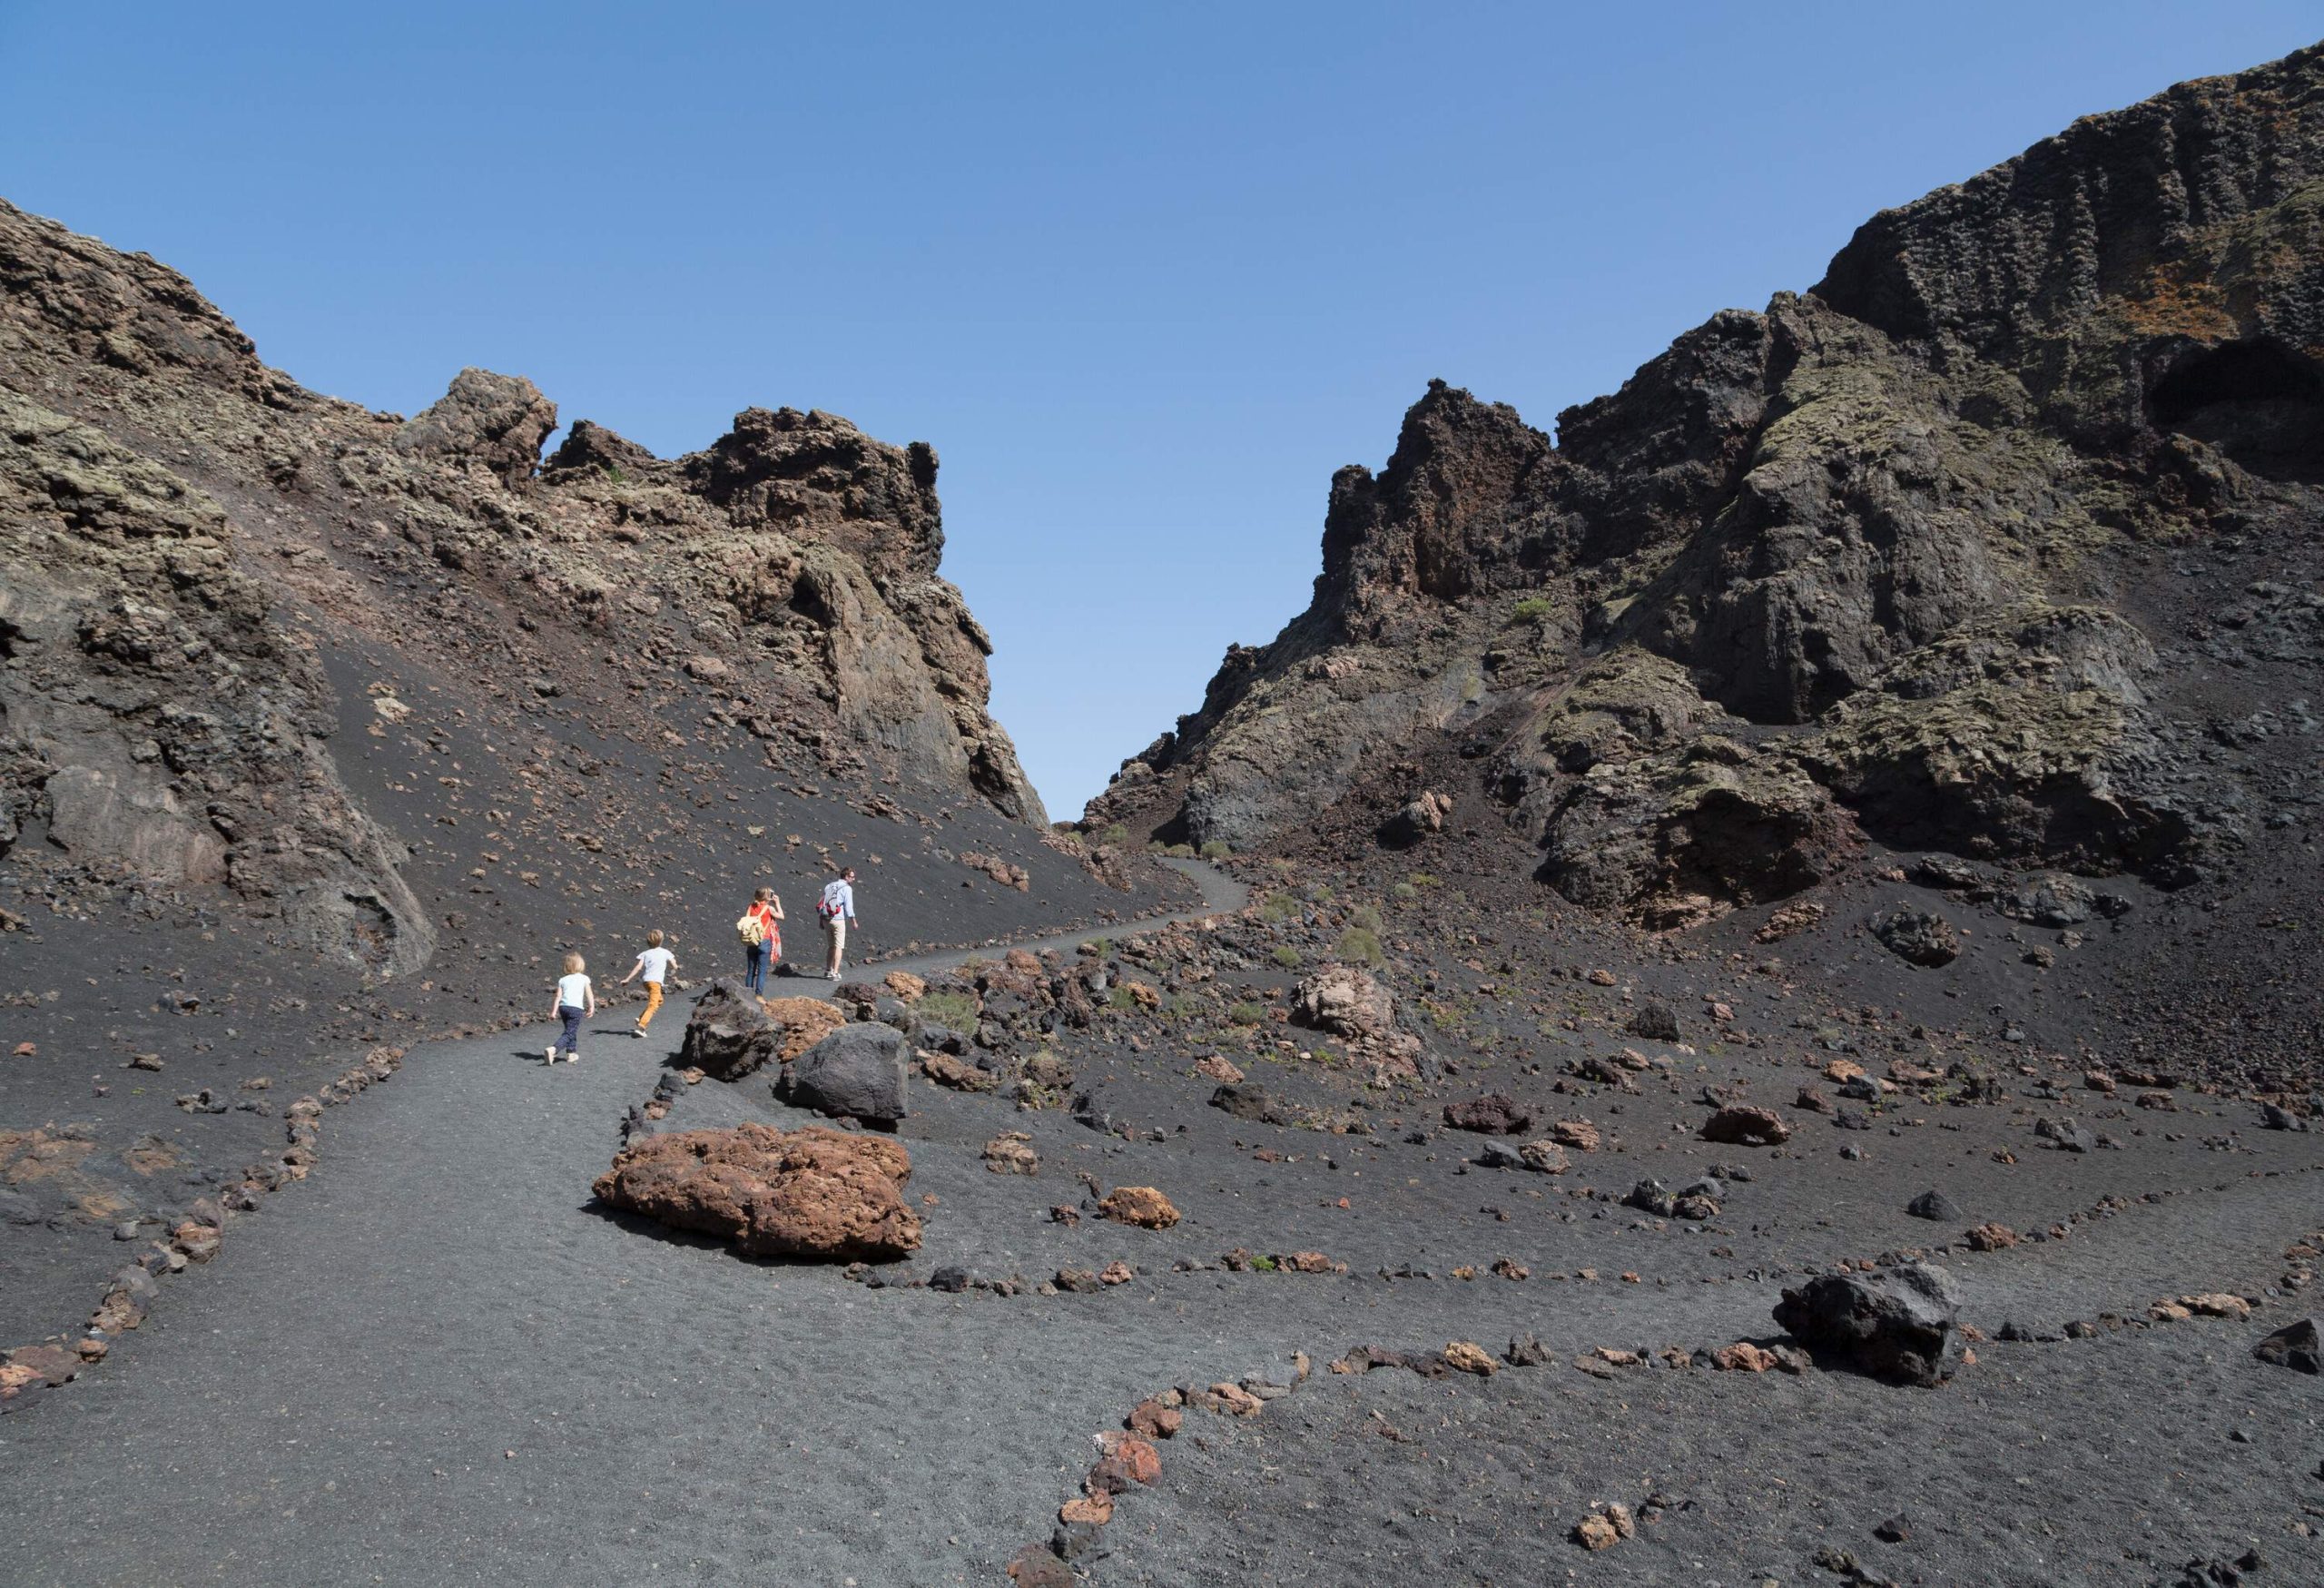 A family of four people walking on the trail of the volcanic mountain.